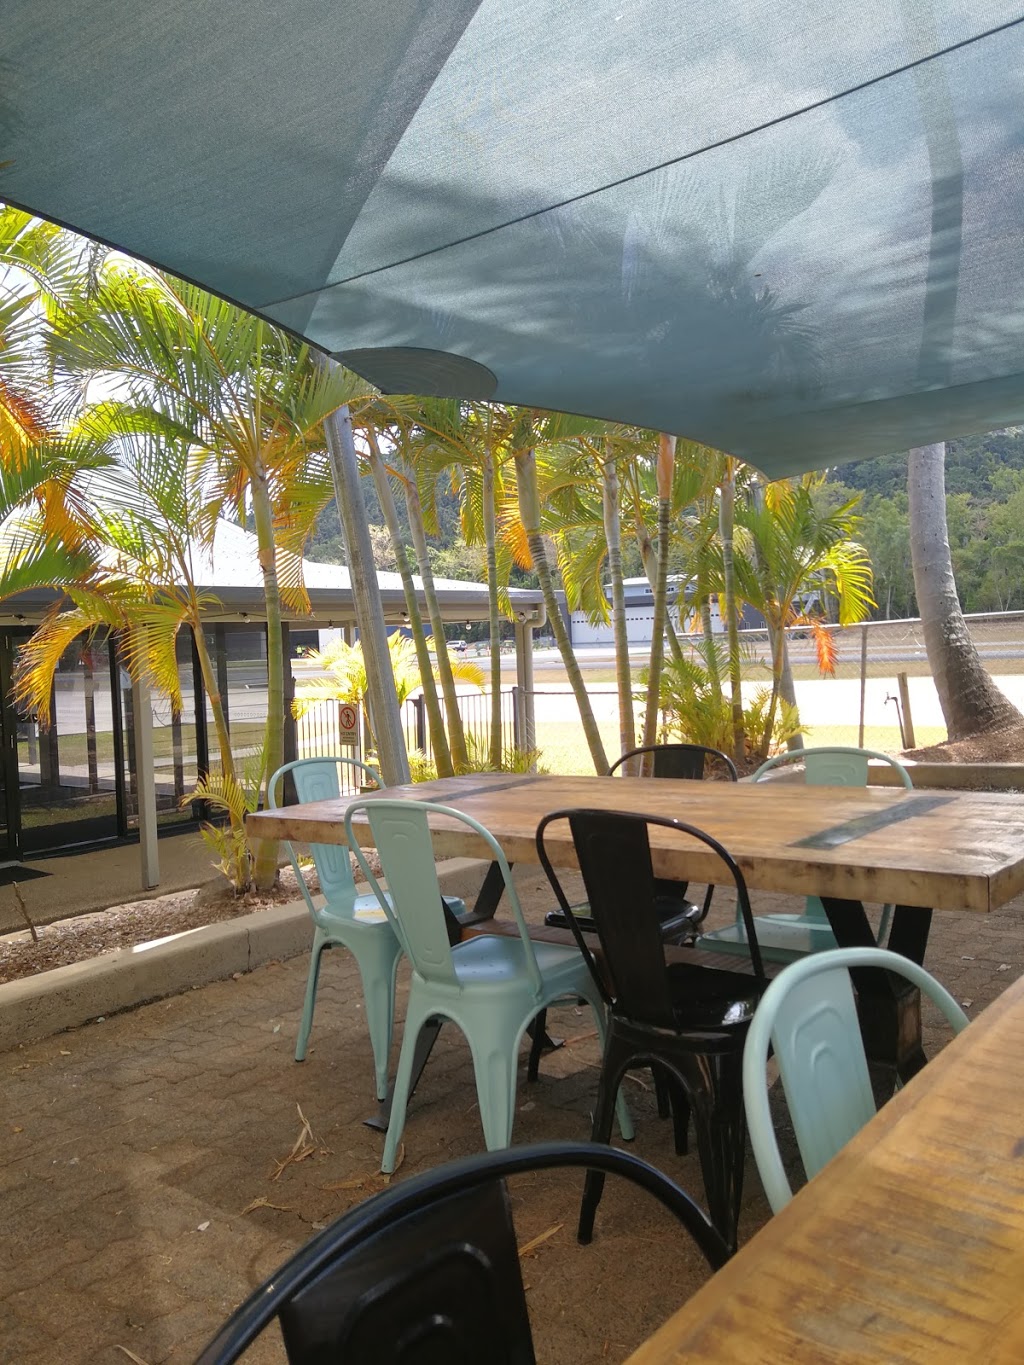 The Hangar Cafe and Bar | cafe | 12 Air Whitsunday Rd, Airlie Beach QLD 4802, Australia | 0487006929 OR +61 487 006 929